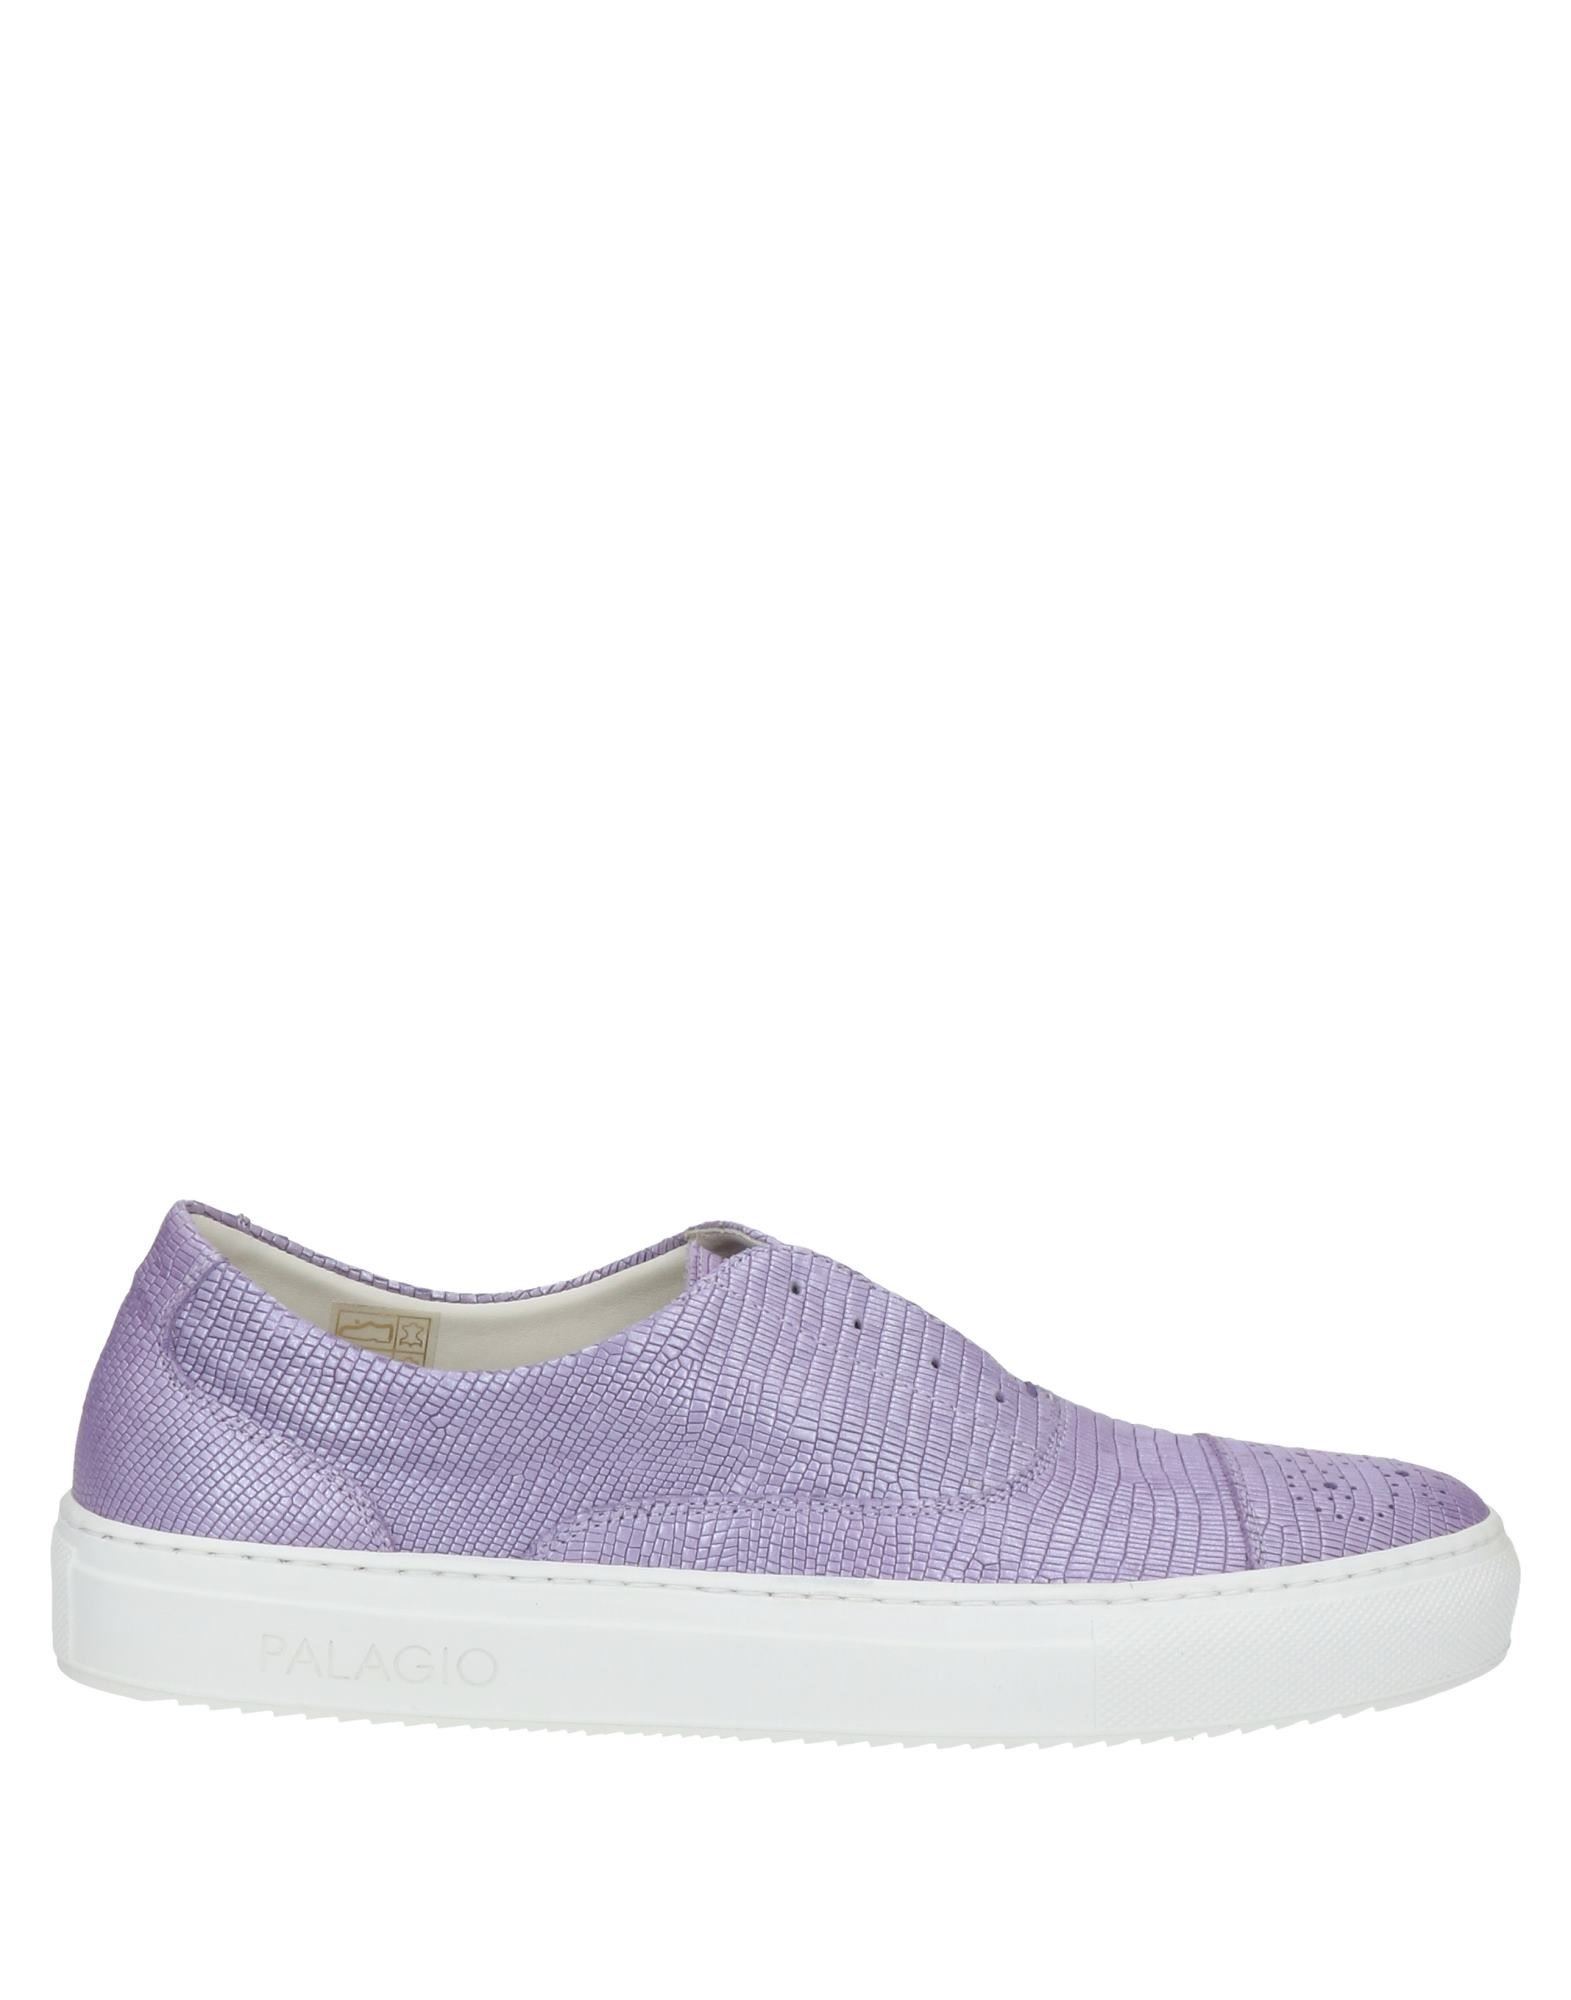 Palagio Firenze Sneakers In Lilac